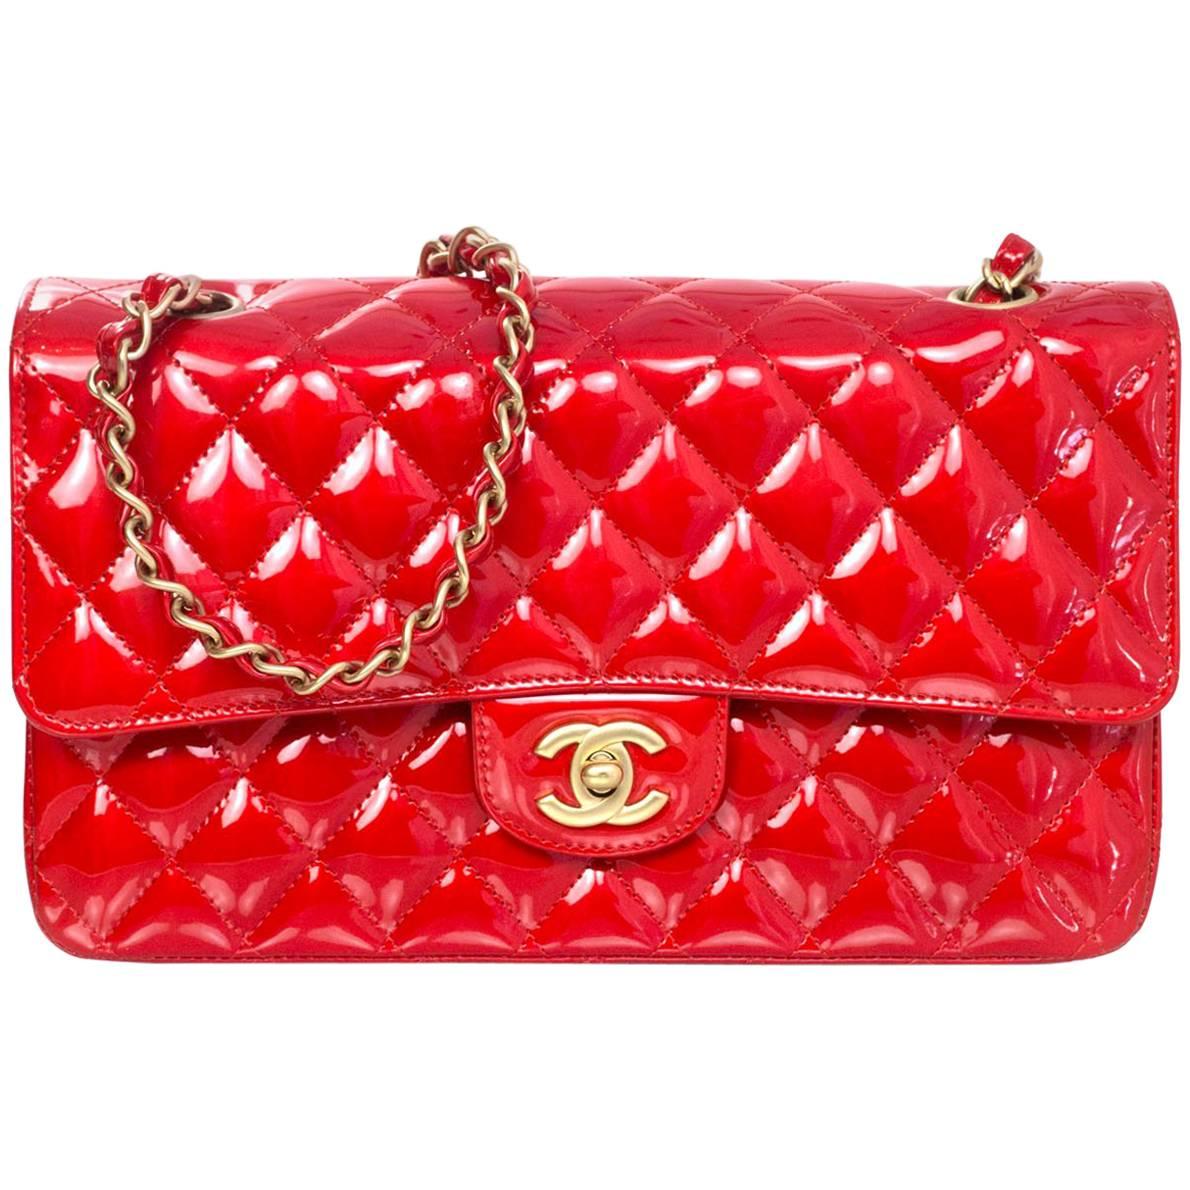 Chanel Collector's Mobile Art Show Signed Red Patent 10" Classic Double Flap Bag